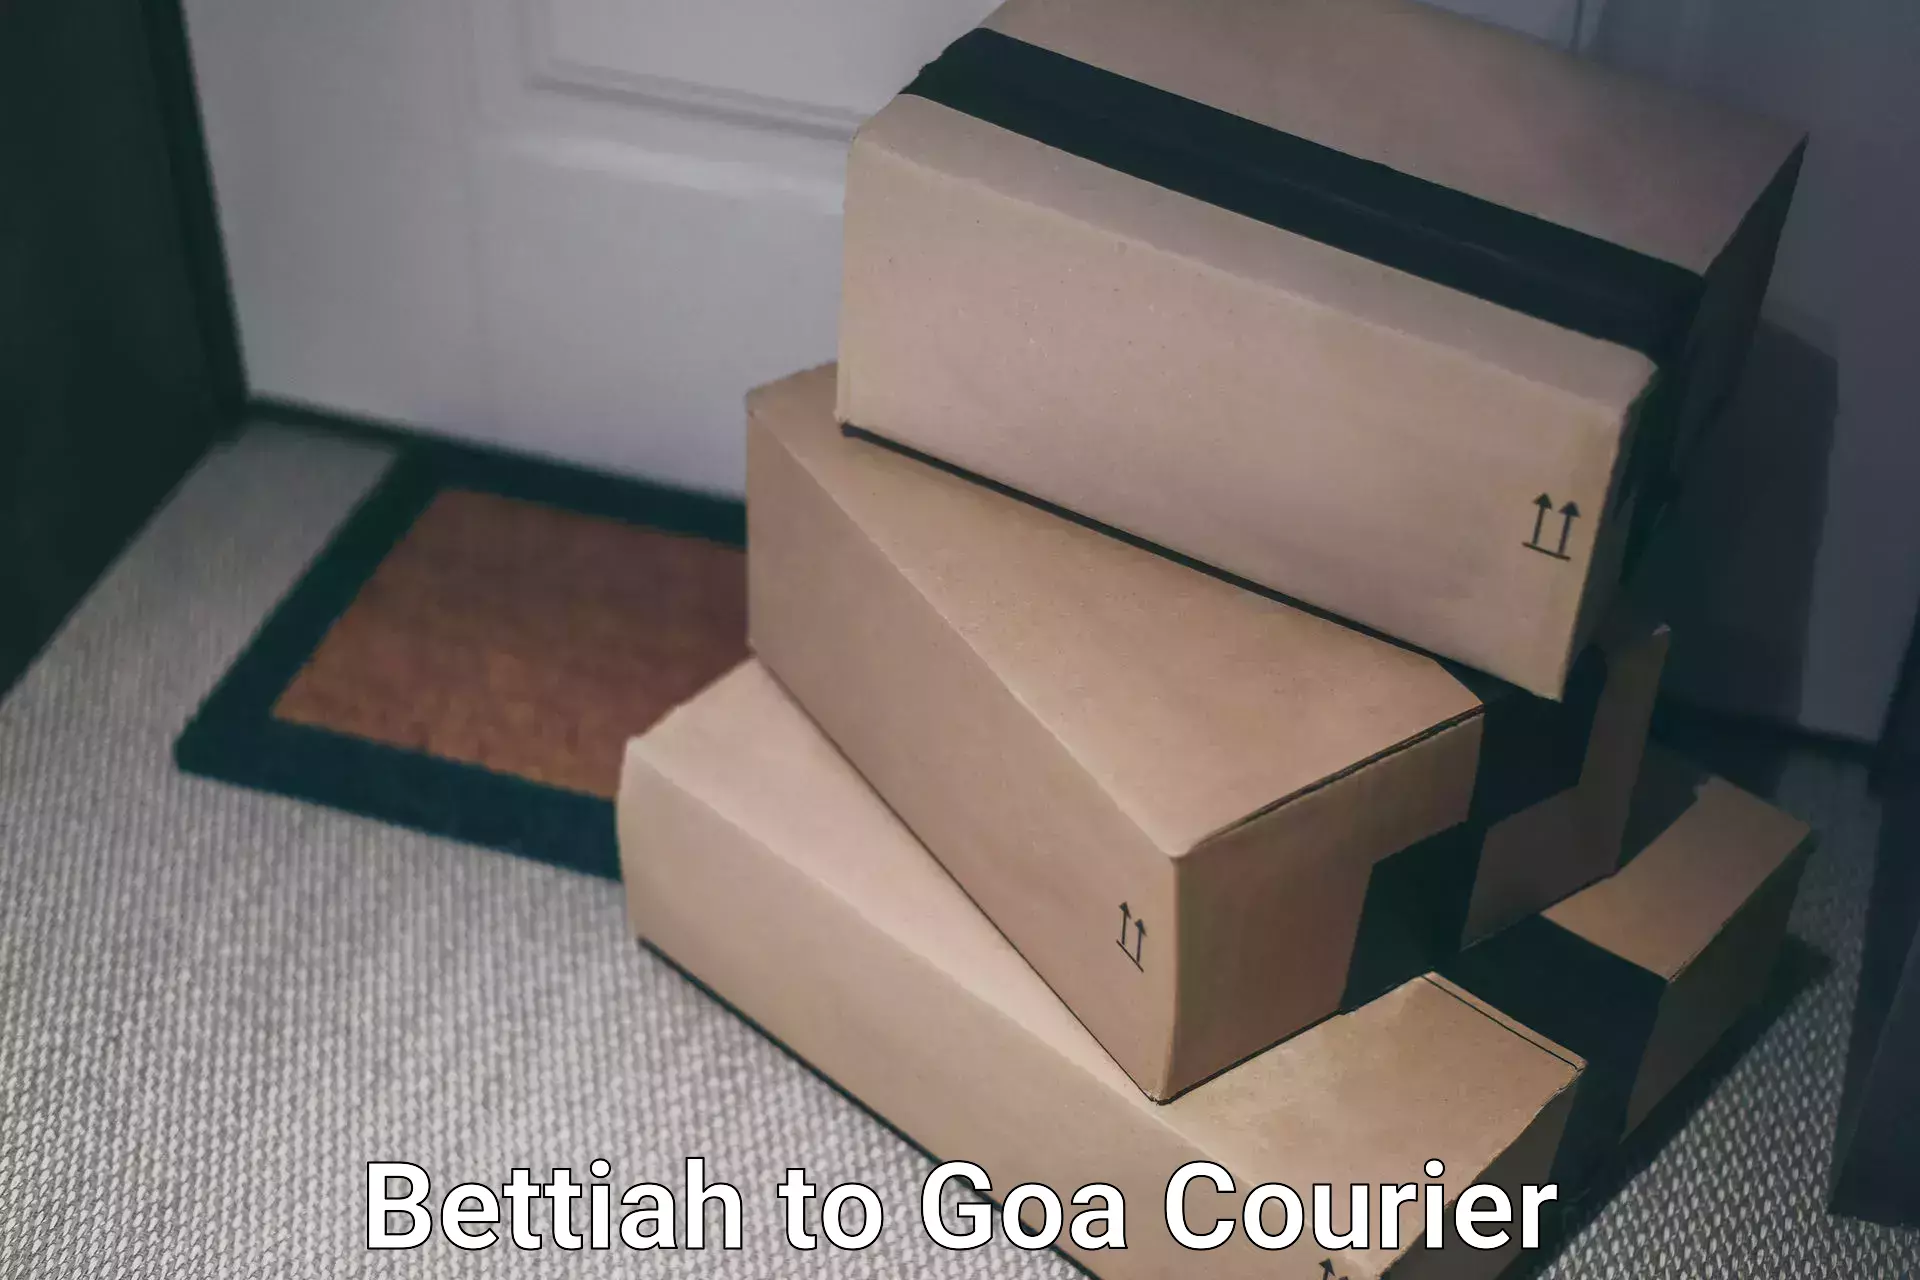 User-friendly delivery service Bettiah to Goa